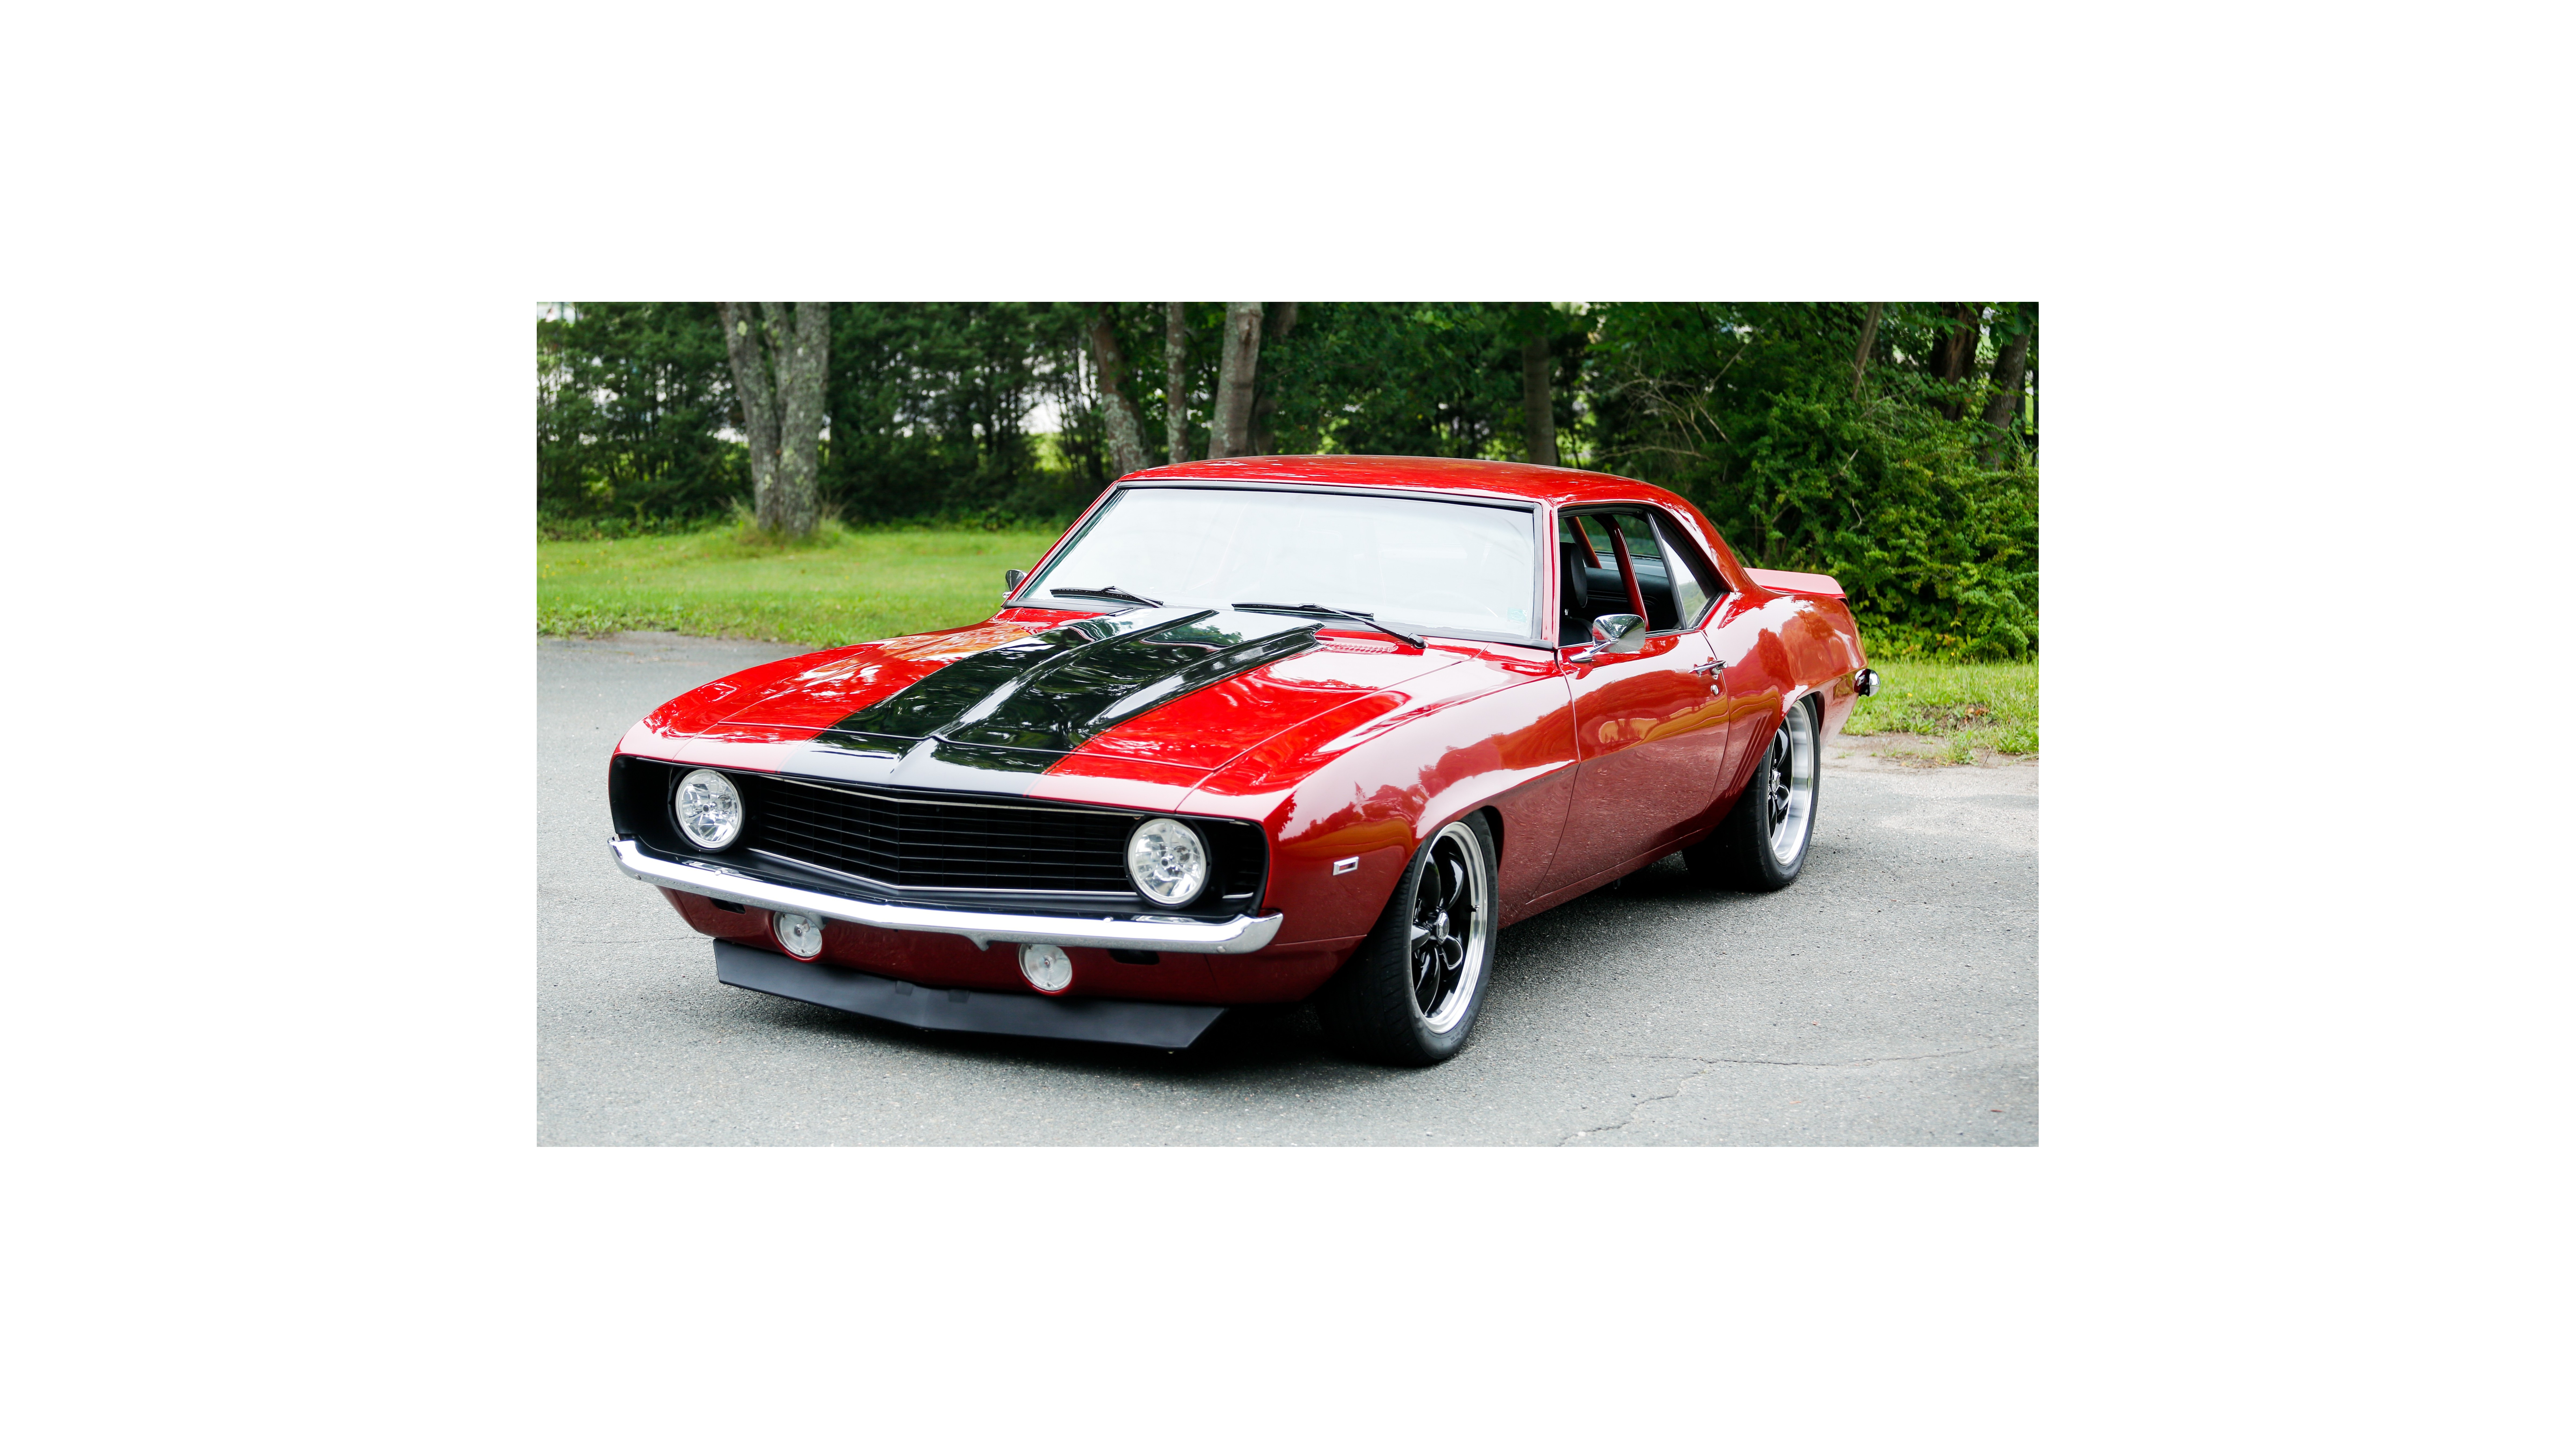 1969 Camaro Coupe OR 50% of Raffle Sales